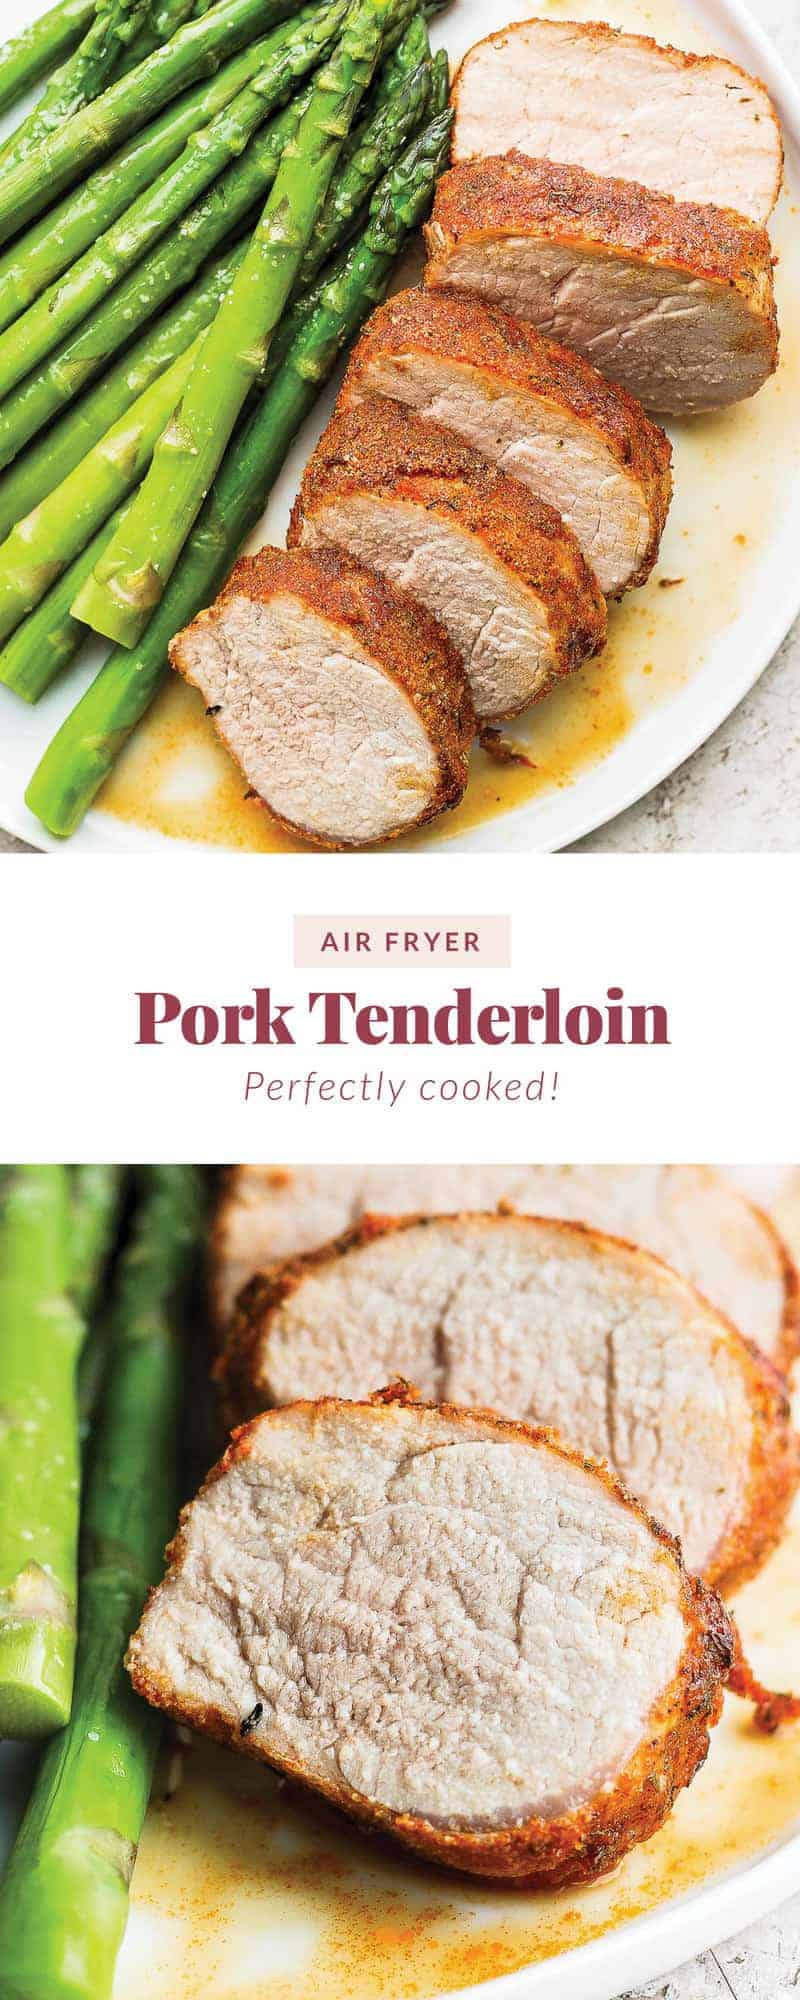 Air Fryer Pork Tenderloin (ready in less than 30!) - Fit Foodie Finds